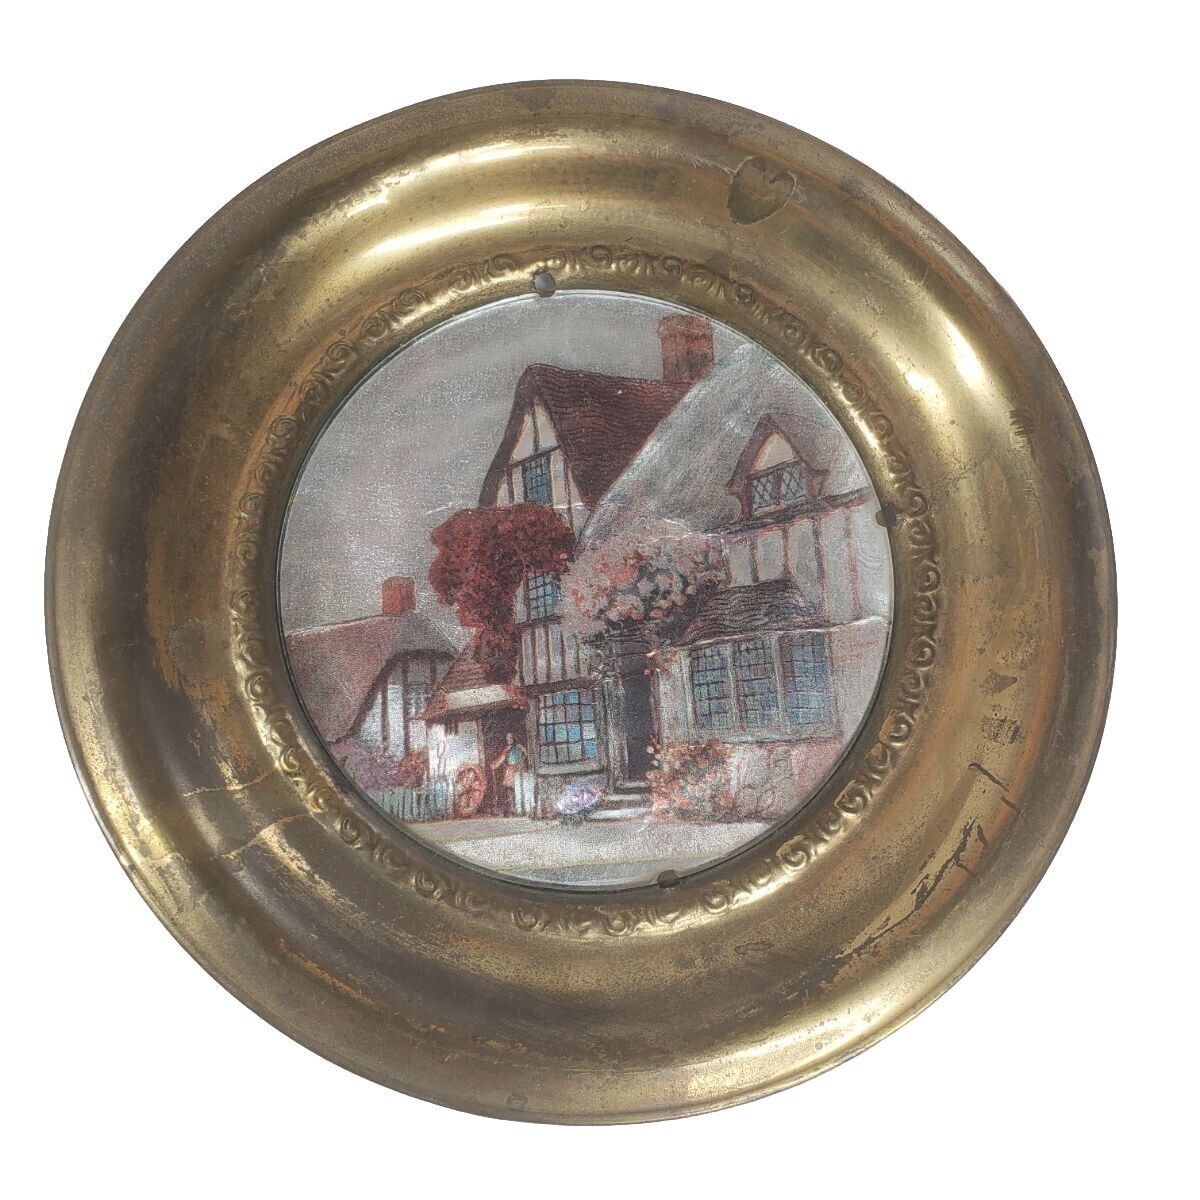 Vintage Solid Brass Wall Plate W/ Foil Print English countryside Made in England